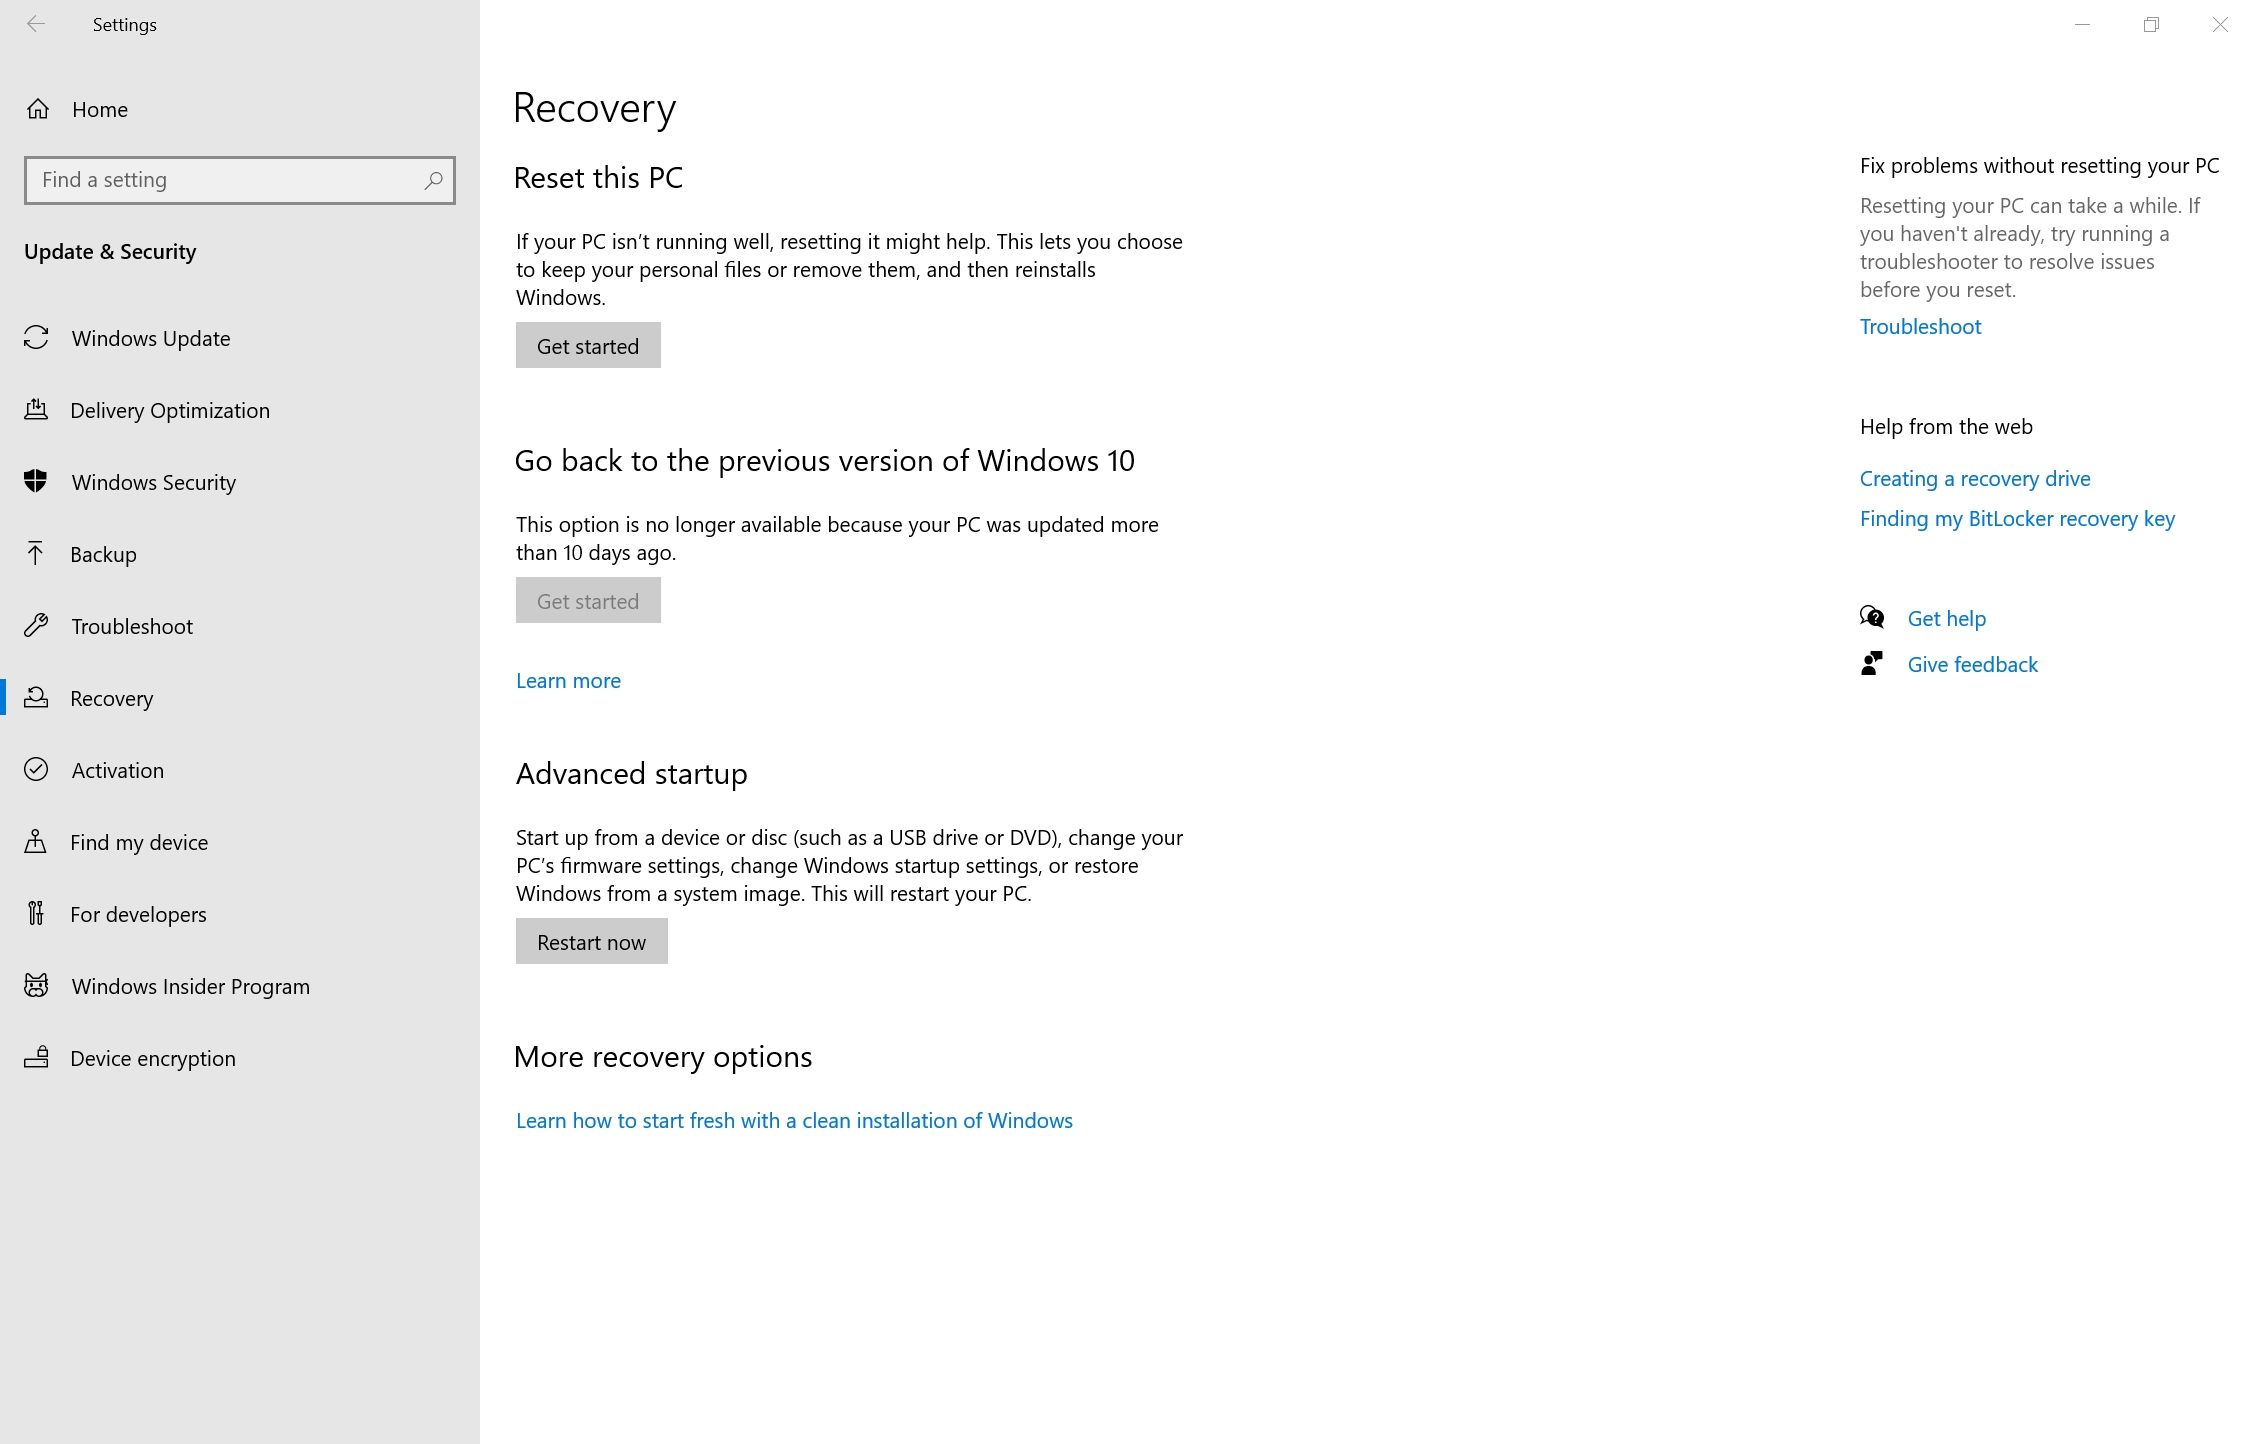 Recovery settings in Windows 10.